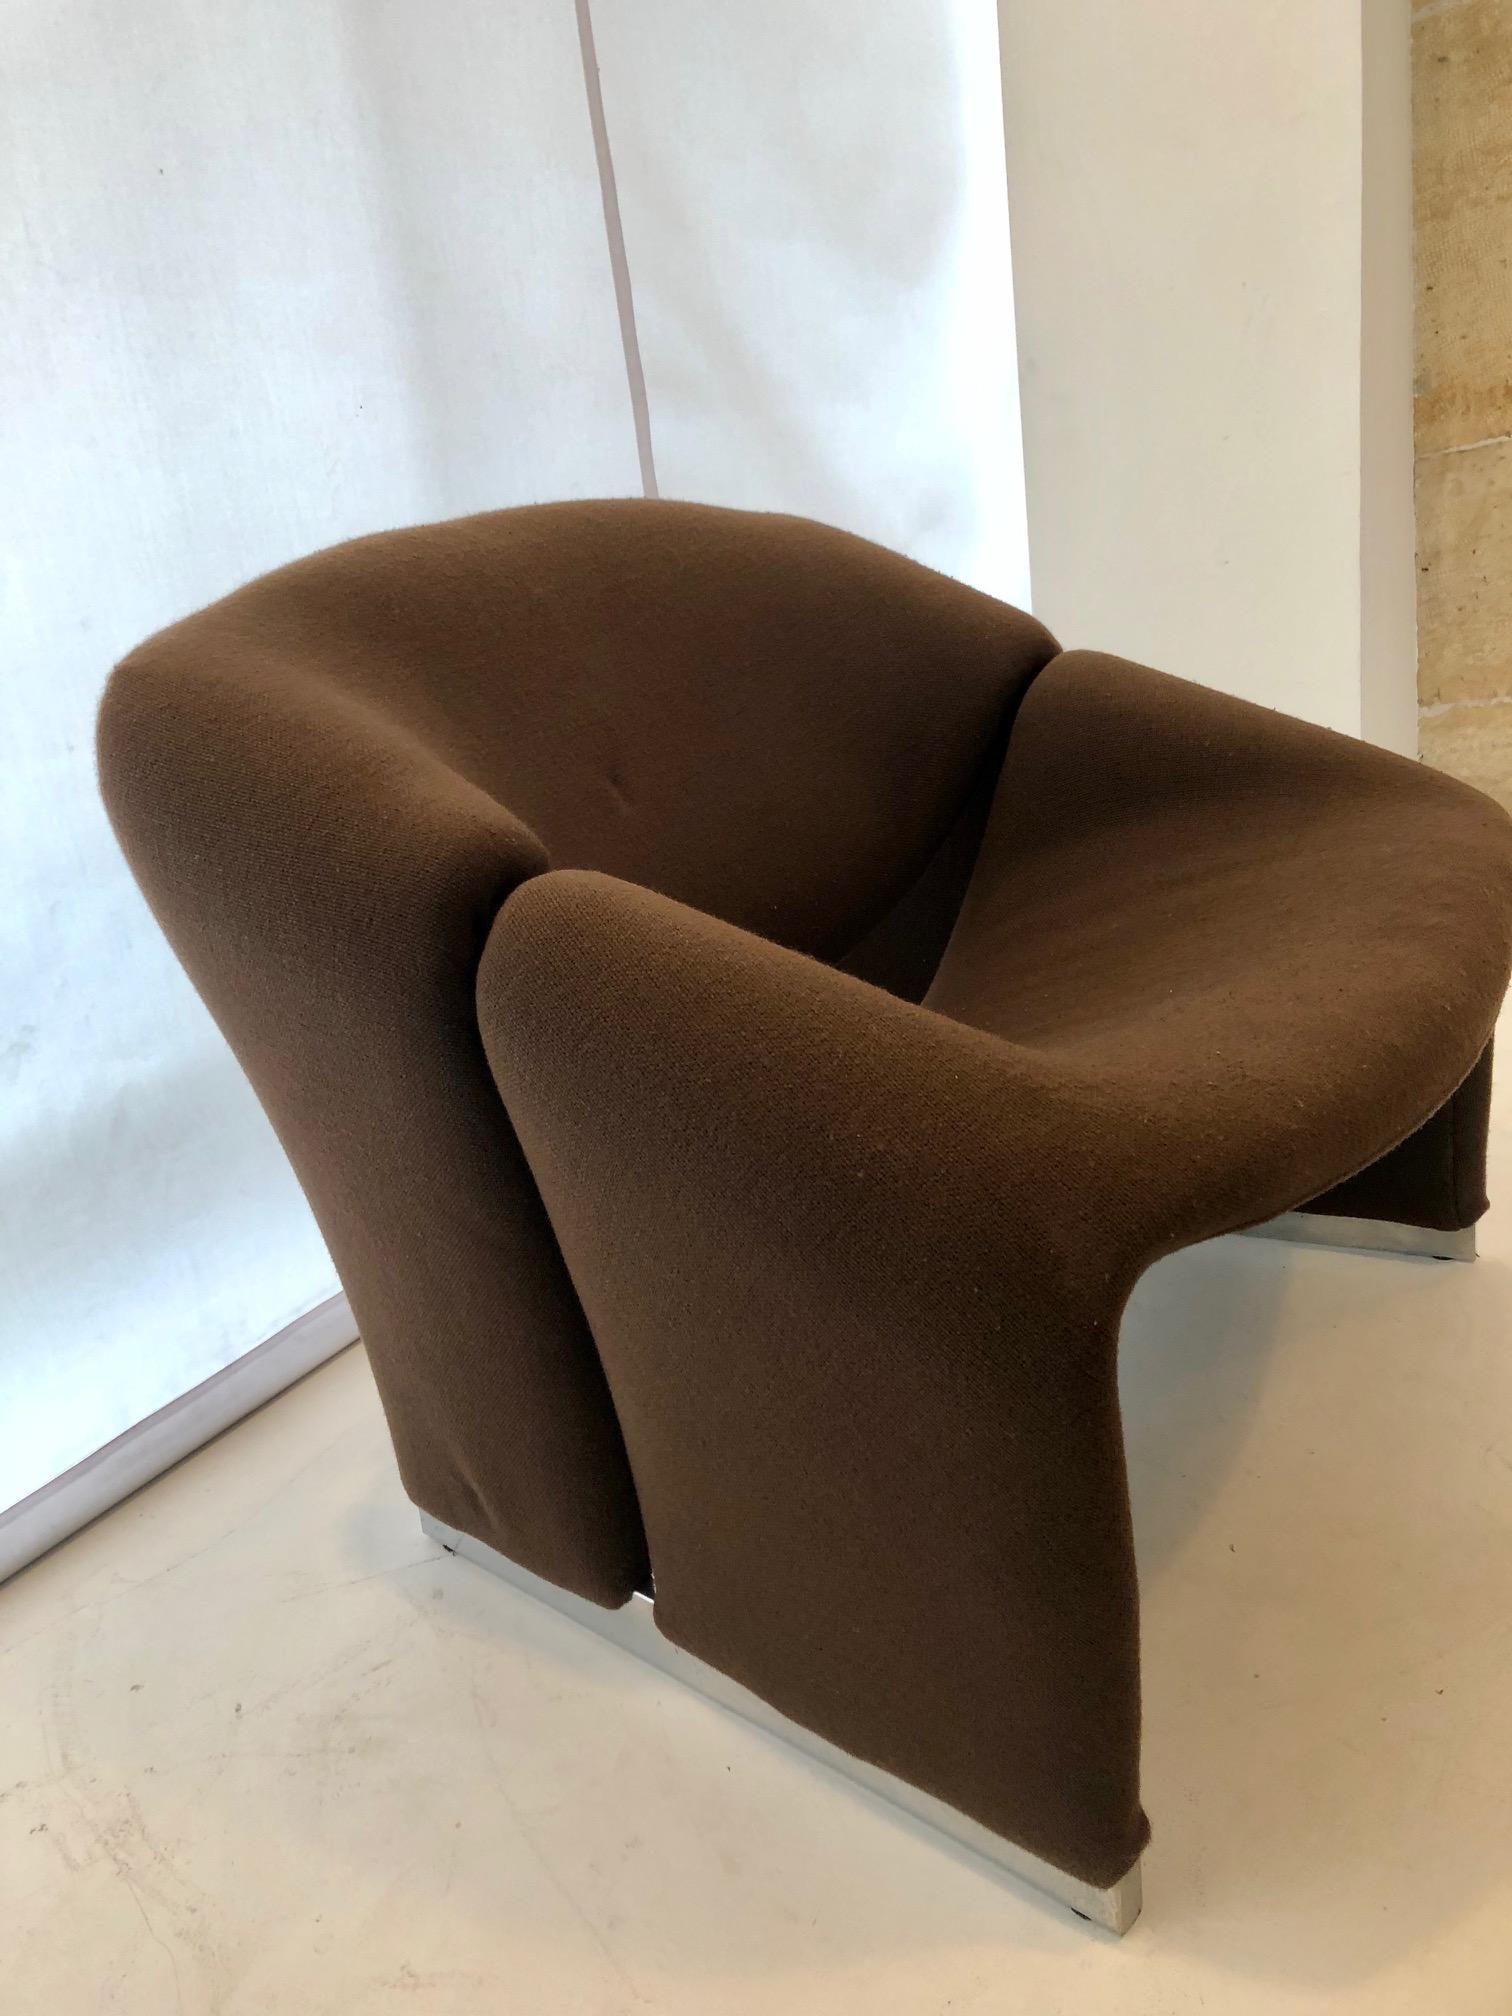 Rare Pierre Paulin F580 lounge chair for Artifort, 1st edition, circa 1960.
7 available
Price includes reupholstery with a tonus 4 fabric from Kvadrat or equivalent.
   